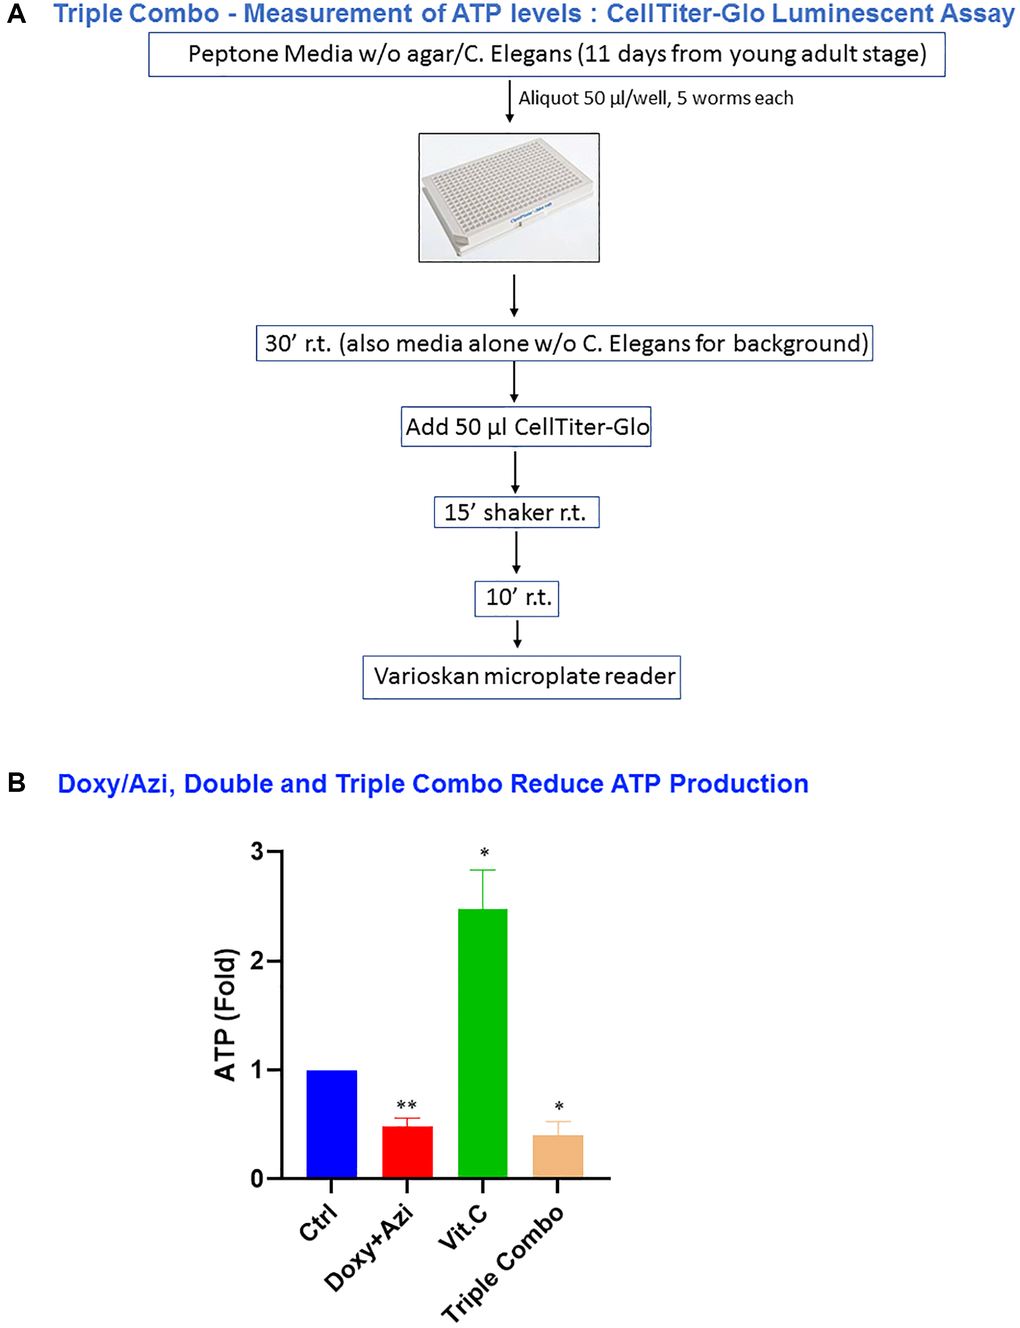 The double combination, doxycycline plus azithromycin, and a triple combination, doxycycline plus azithromycin plus vitamin C, were effective in decreasing the ATP levels in C. elegans. (A) Schematic representation of the protocol for CellTiter-Glo luminescent assay performed in experiments using the double and triple combination. (B) Measurement of ATP levels. The final concentrations of the compounds used in this experiment were 1 μM for doxycycline and azithromycin, and 250 μM for vitamin C. Data are shown as the mean ± SEM; Statistical analysis was performed using one-sample t-test. *p **p 